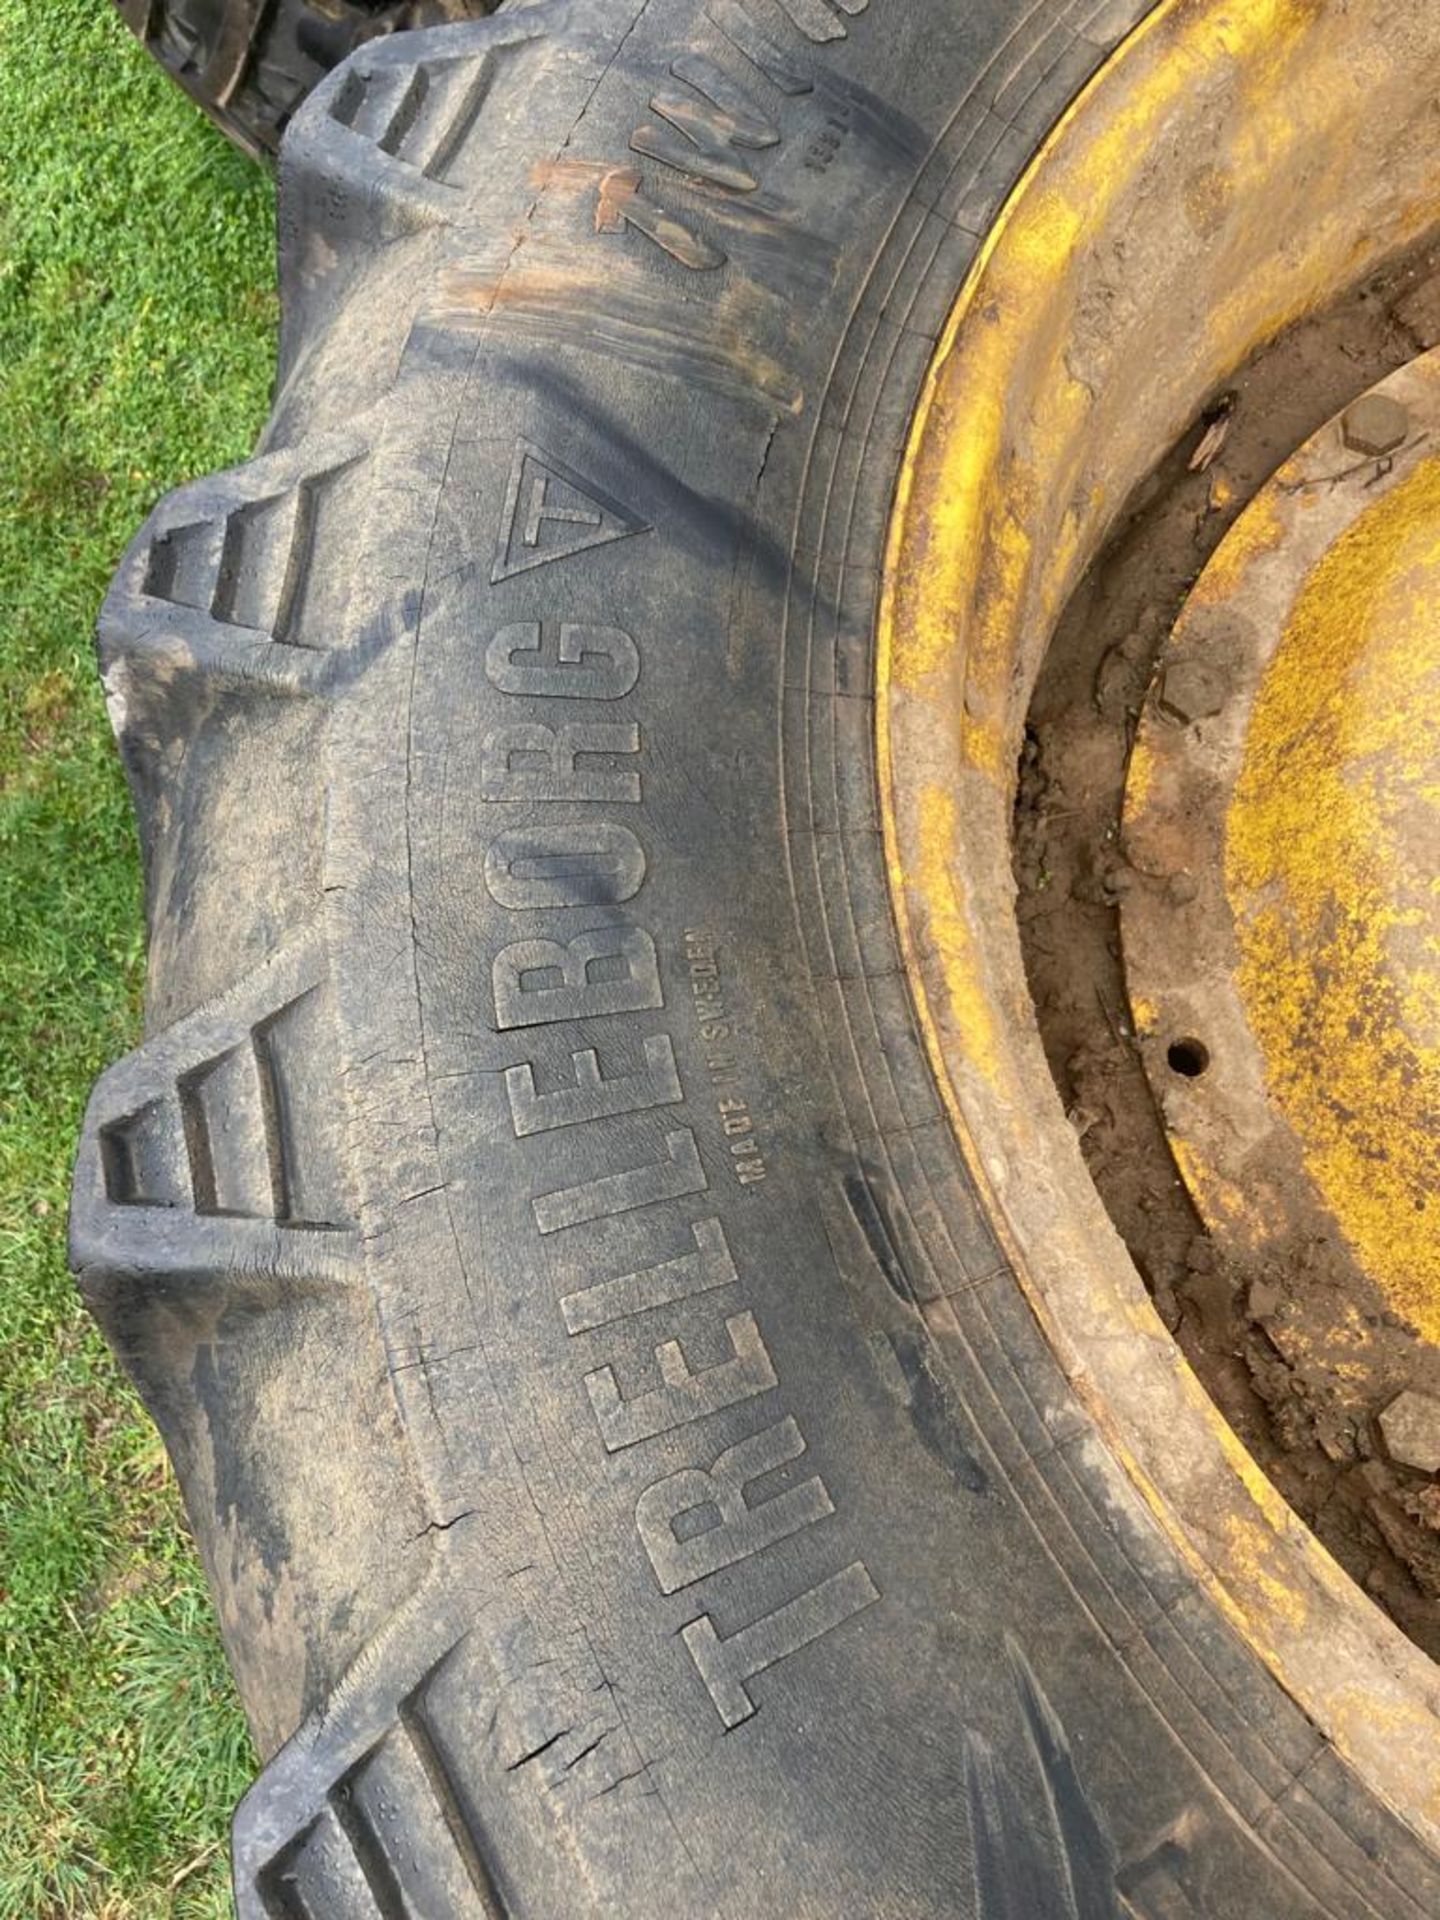 Tyres Rear 850/55/42 x 2 Front 750/50-30.5 x 2, for a 7530, Condition very little tread. - Image 5 of 6